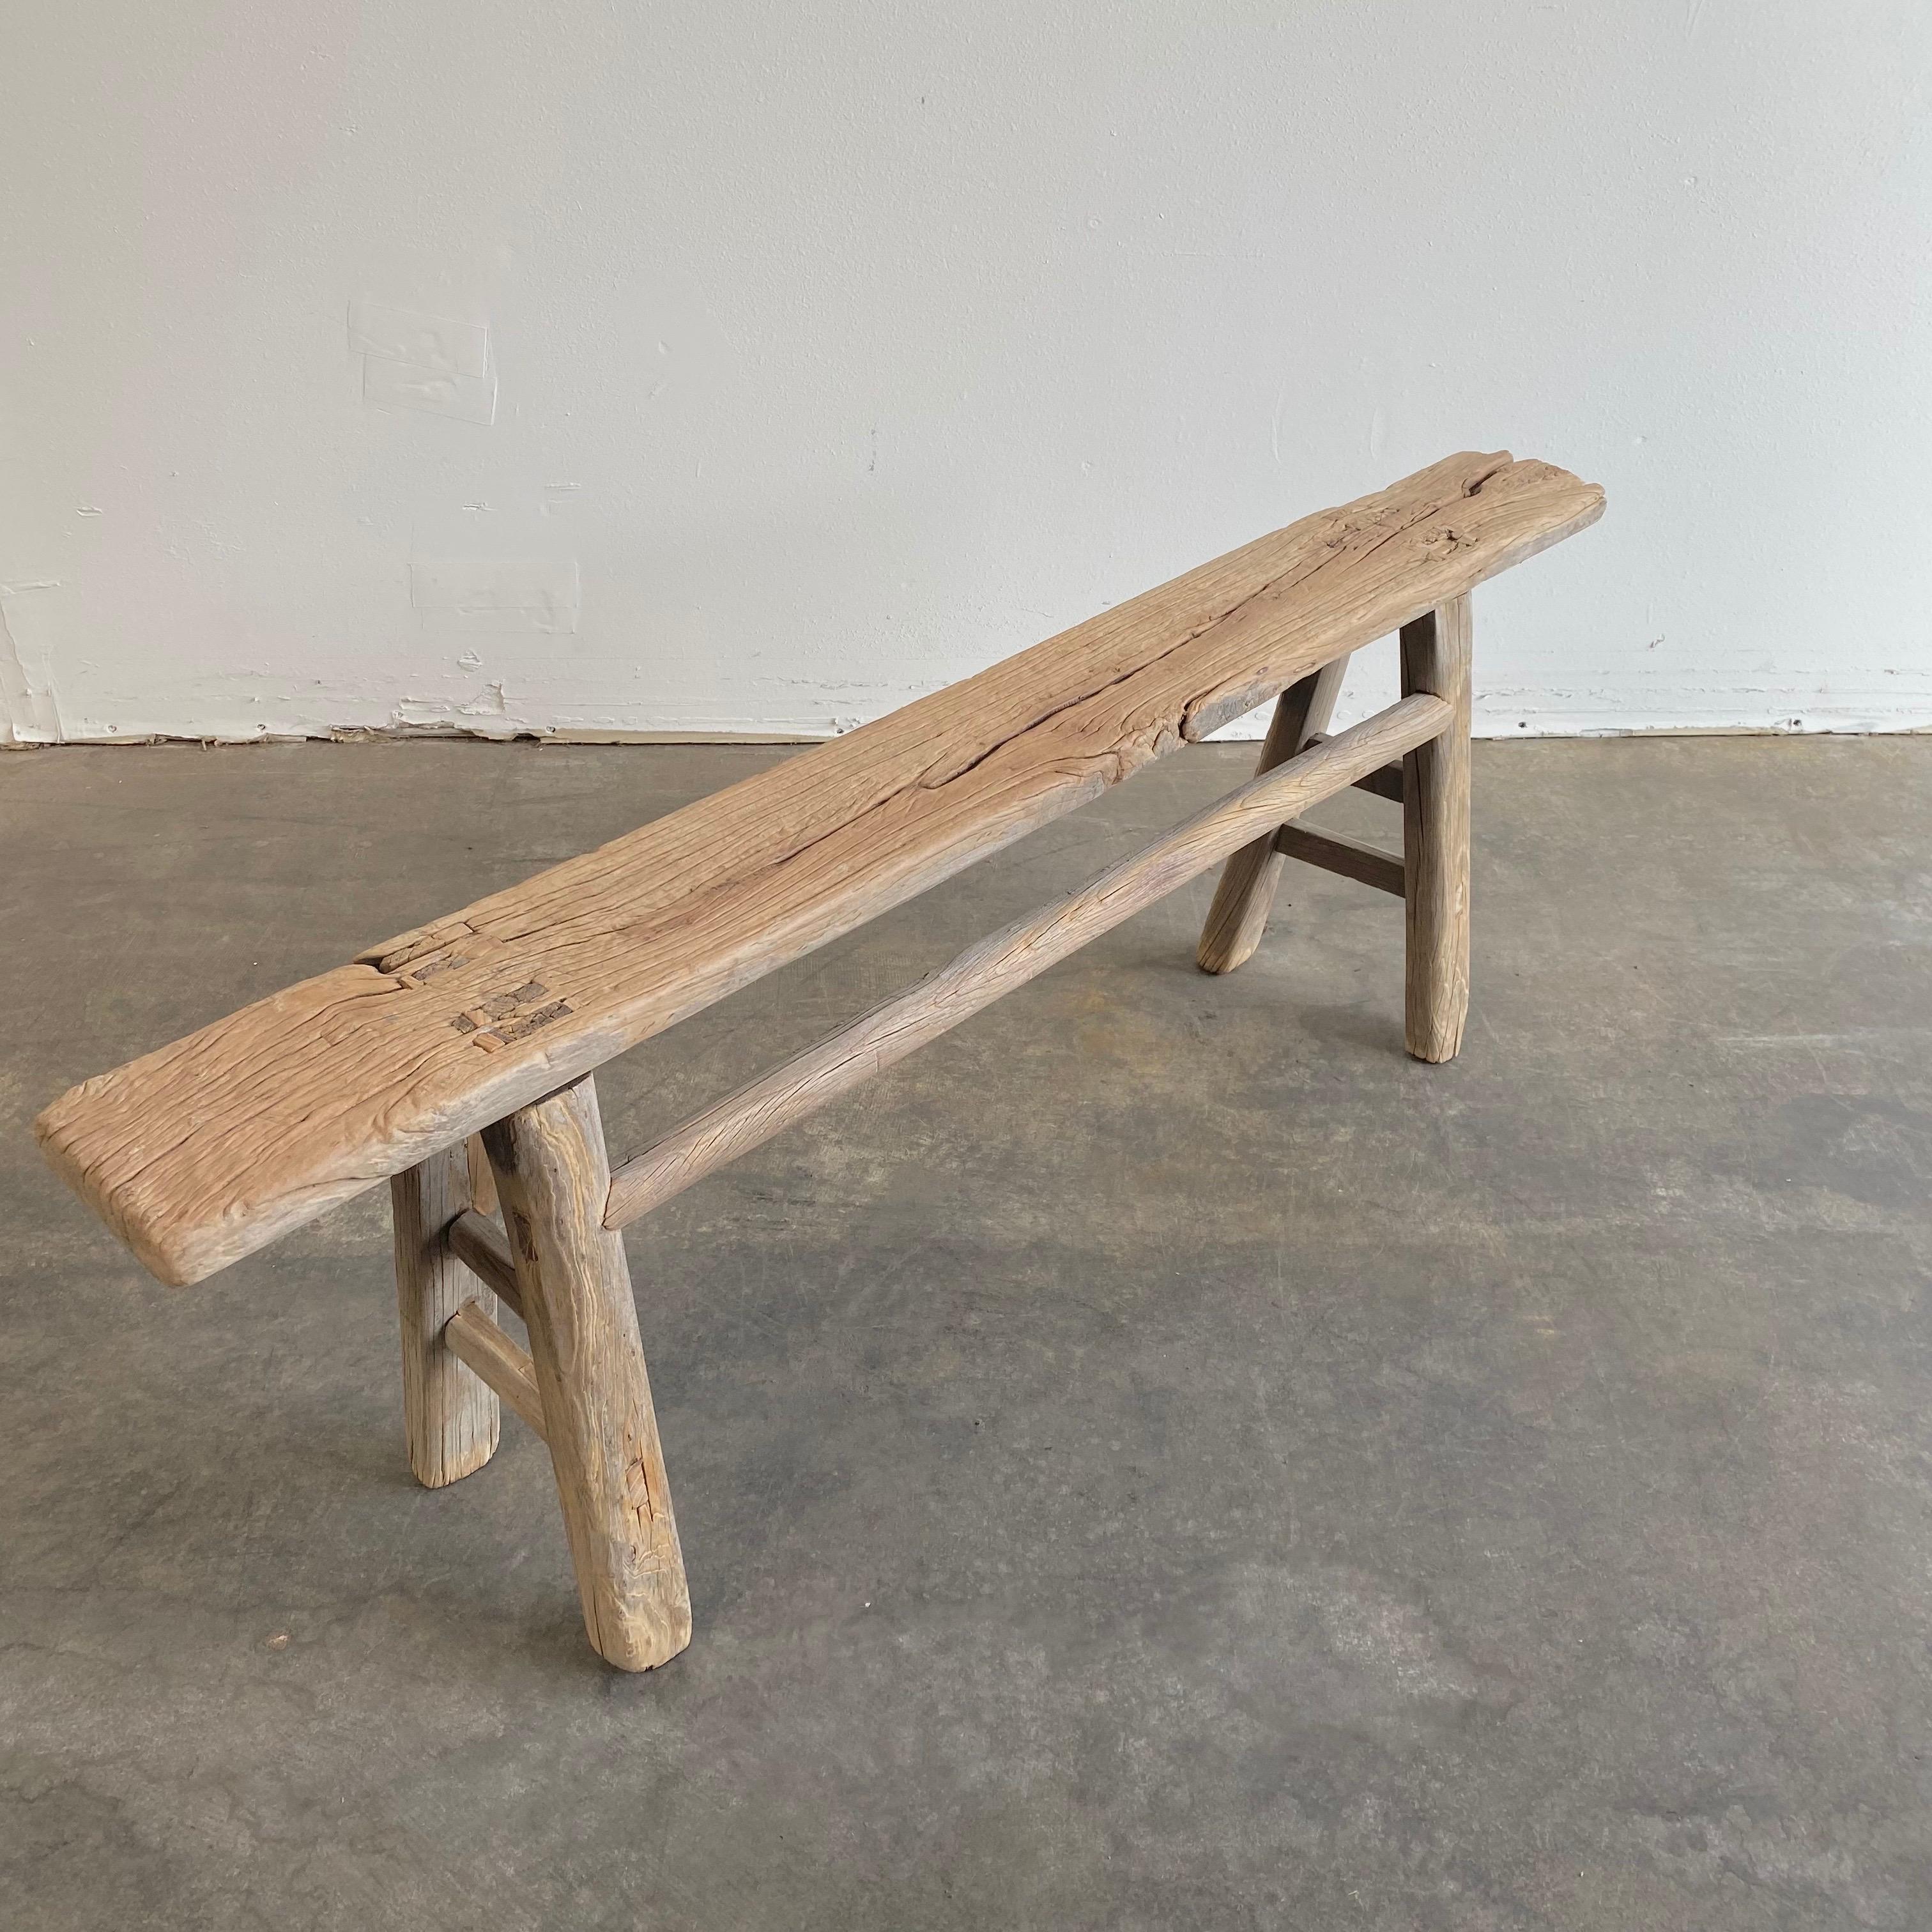 Vintage antique elm wood skinny bench
These are the real vintage antique elm wood skinny benches! Beautiful antique patina, with weathering and age, these are solid and sturdy ready for daily use, use as as a table behind a sofa, stool, coffee